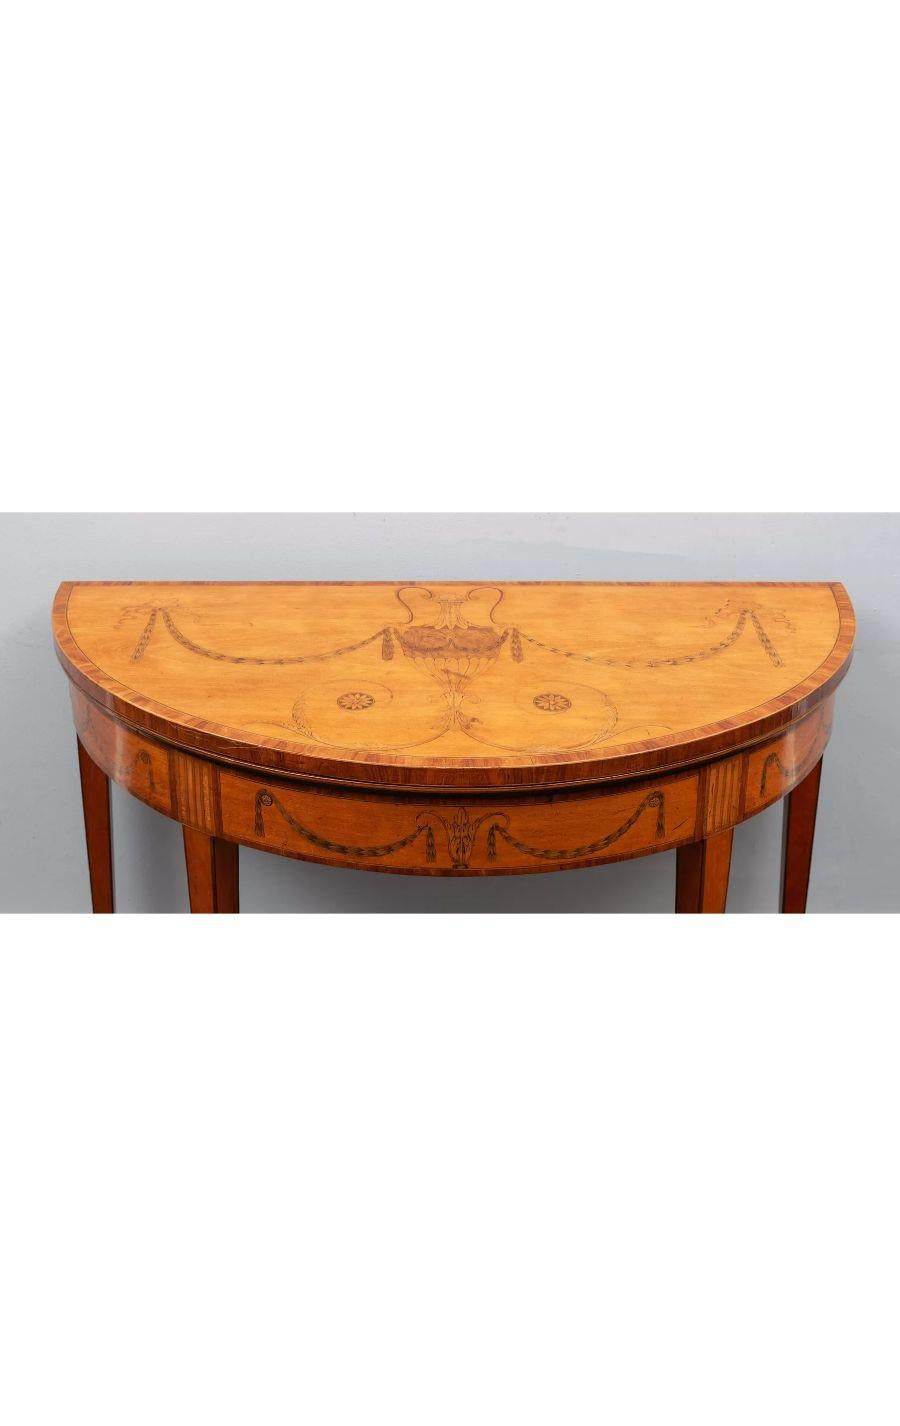 A George III inlaid Satinwood demi-lune games table, in the manner of William Moore.

Neo-classical in style, with particularly fine marquetry and parquetry inlays of exotic timbers.

Tapering supports ending in brass casters.

Circa